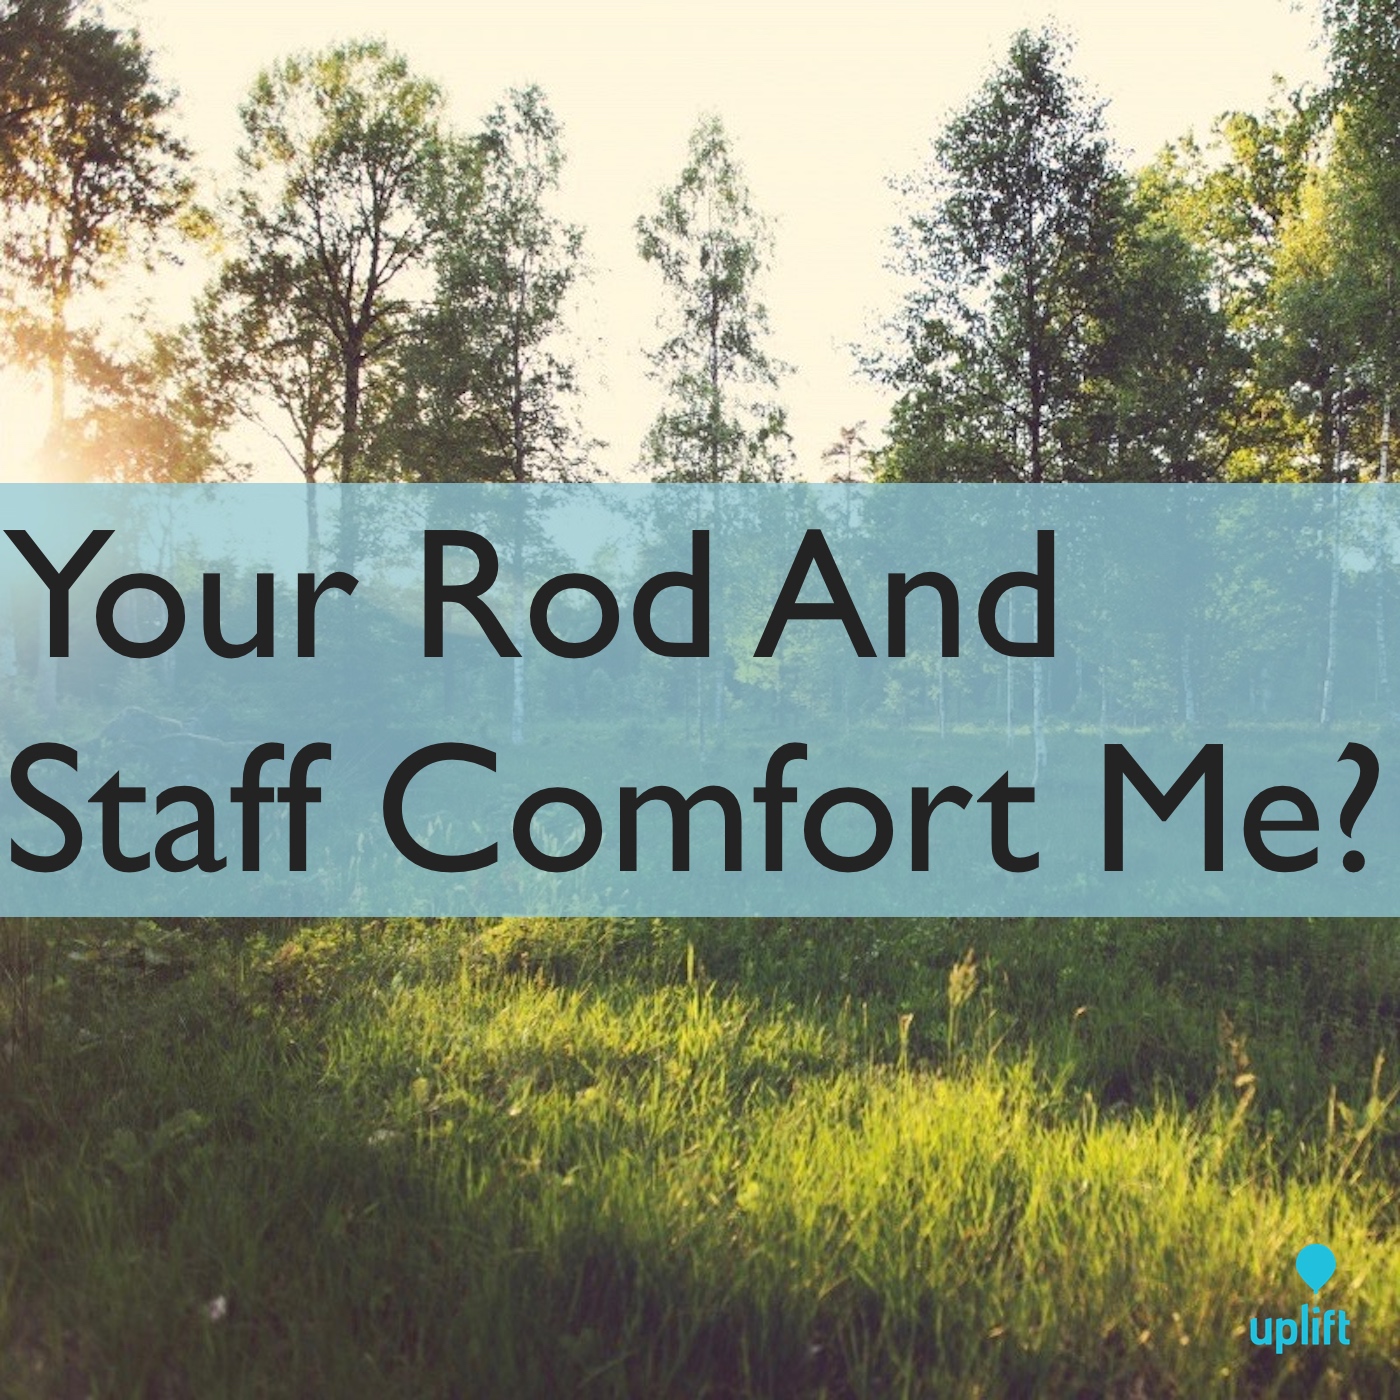 Episode 52: Your Rod And Staff Comfort Me?